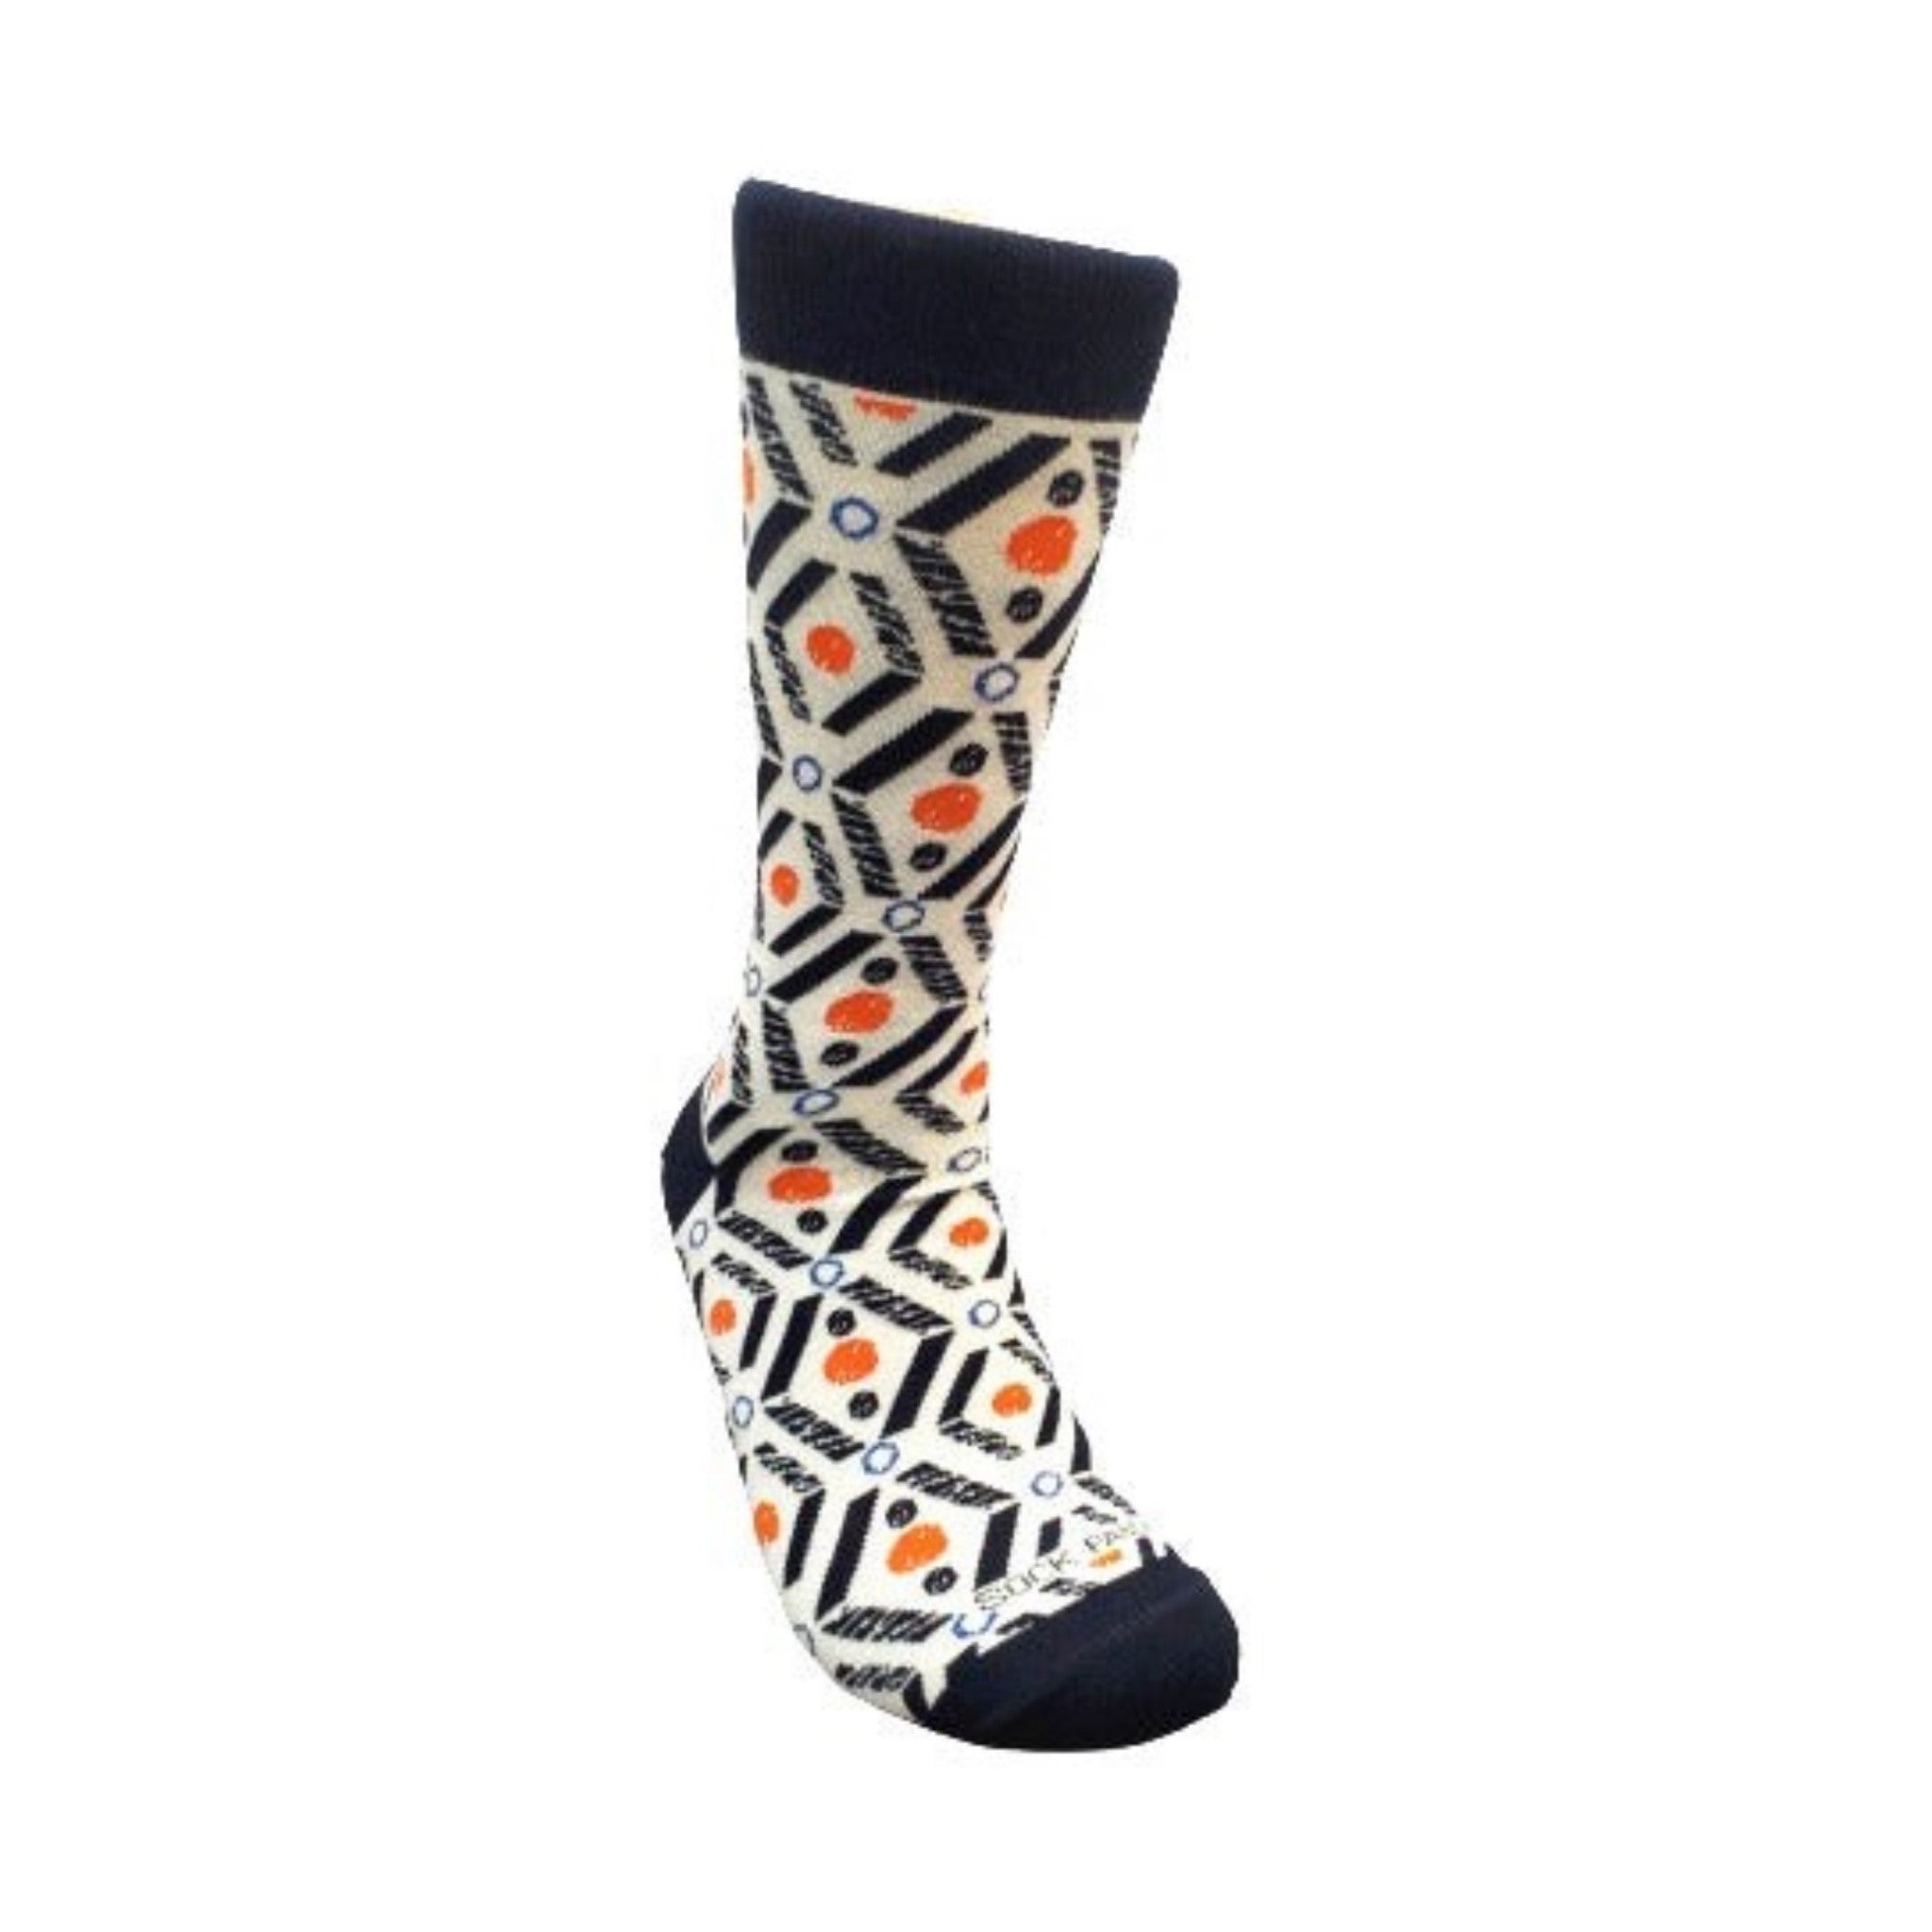 Salmon and Navy Blue Patterned Socks (Adult Large) from the Sock Panda